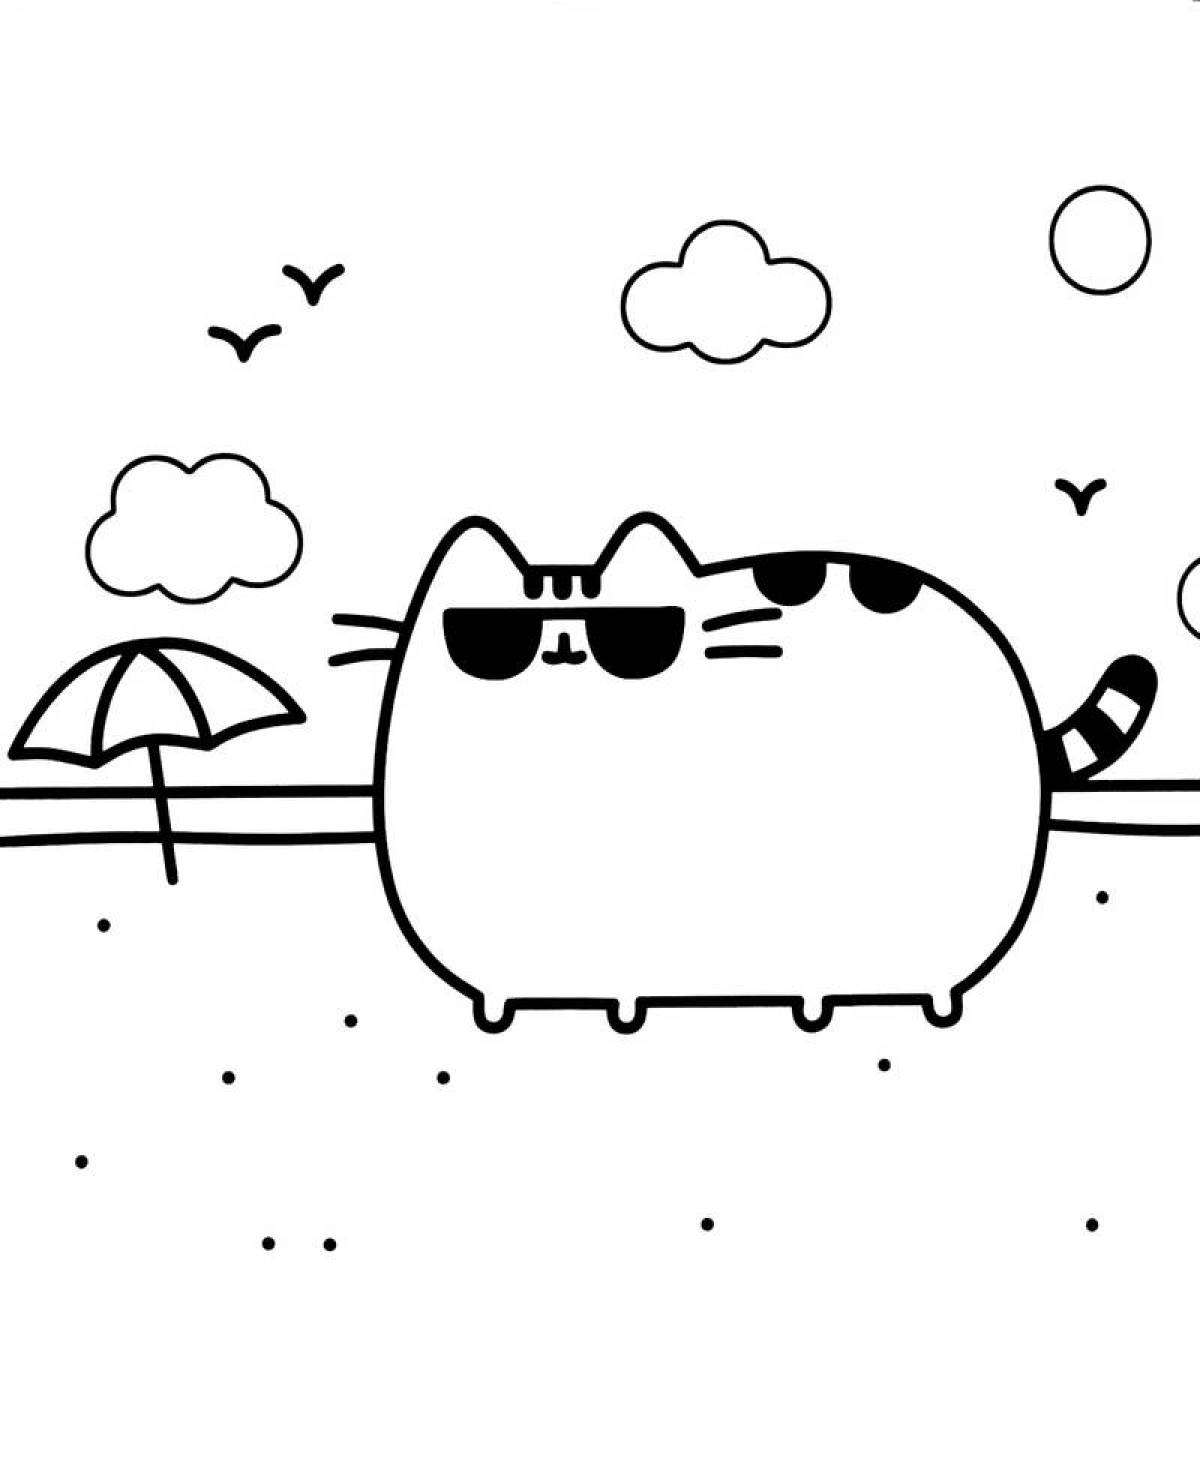 Adorable pusheen cat coloring page